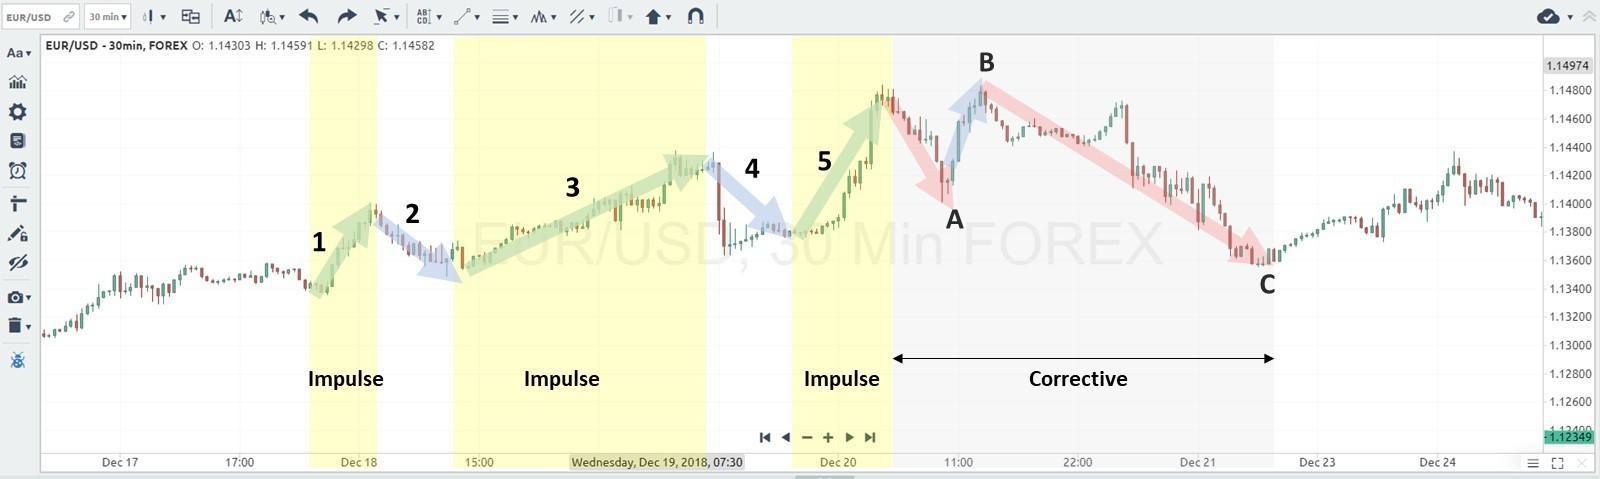 Chart showing excellent opportunities when impulse trend movement reverses.